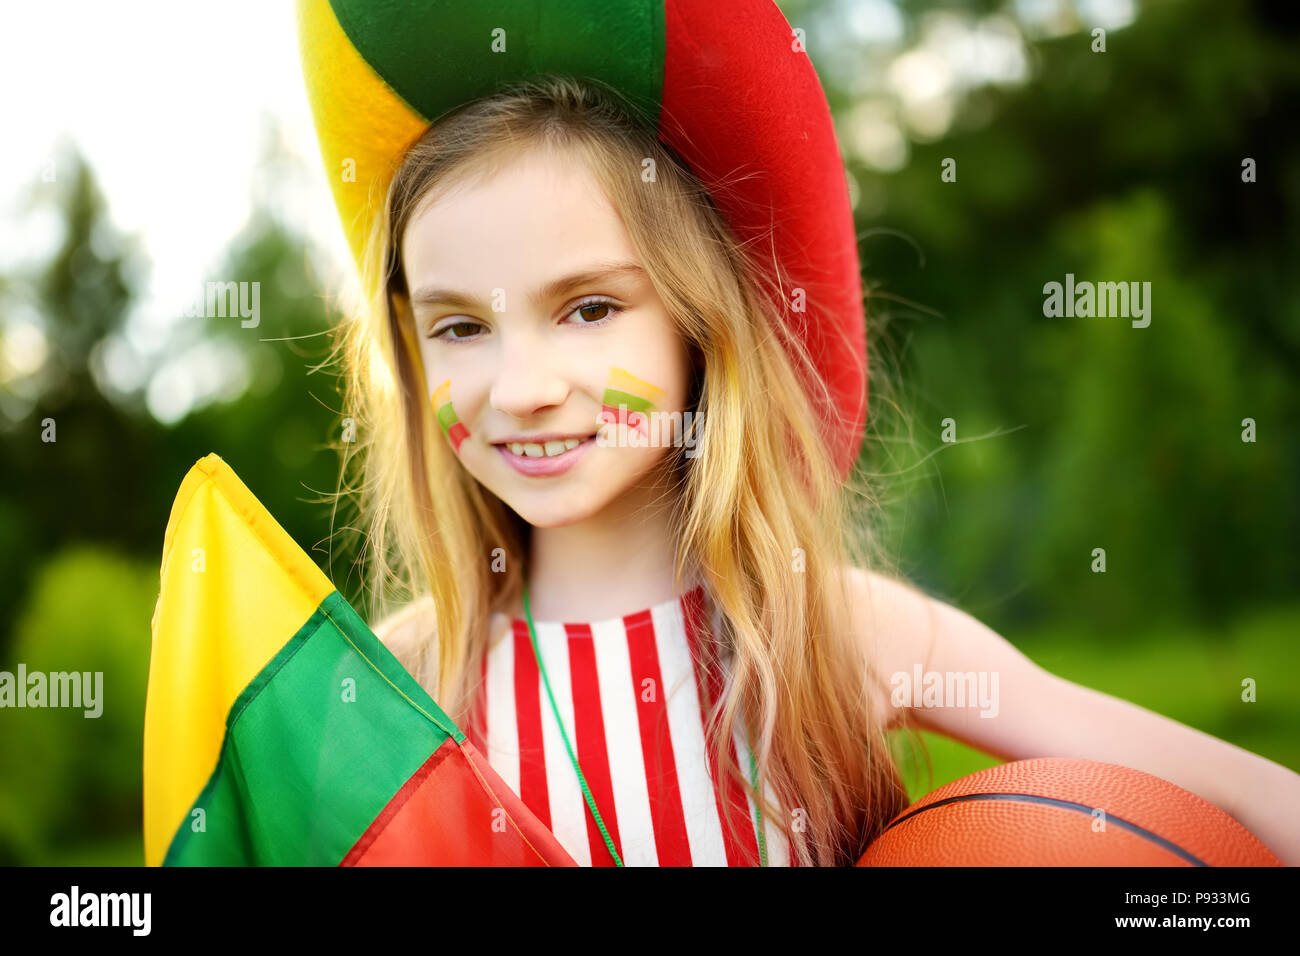 Funny little girl supporting and cheering her national basketball team during basketball championship. Cute Lithuanian team fan. Stock Photo